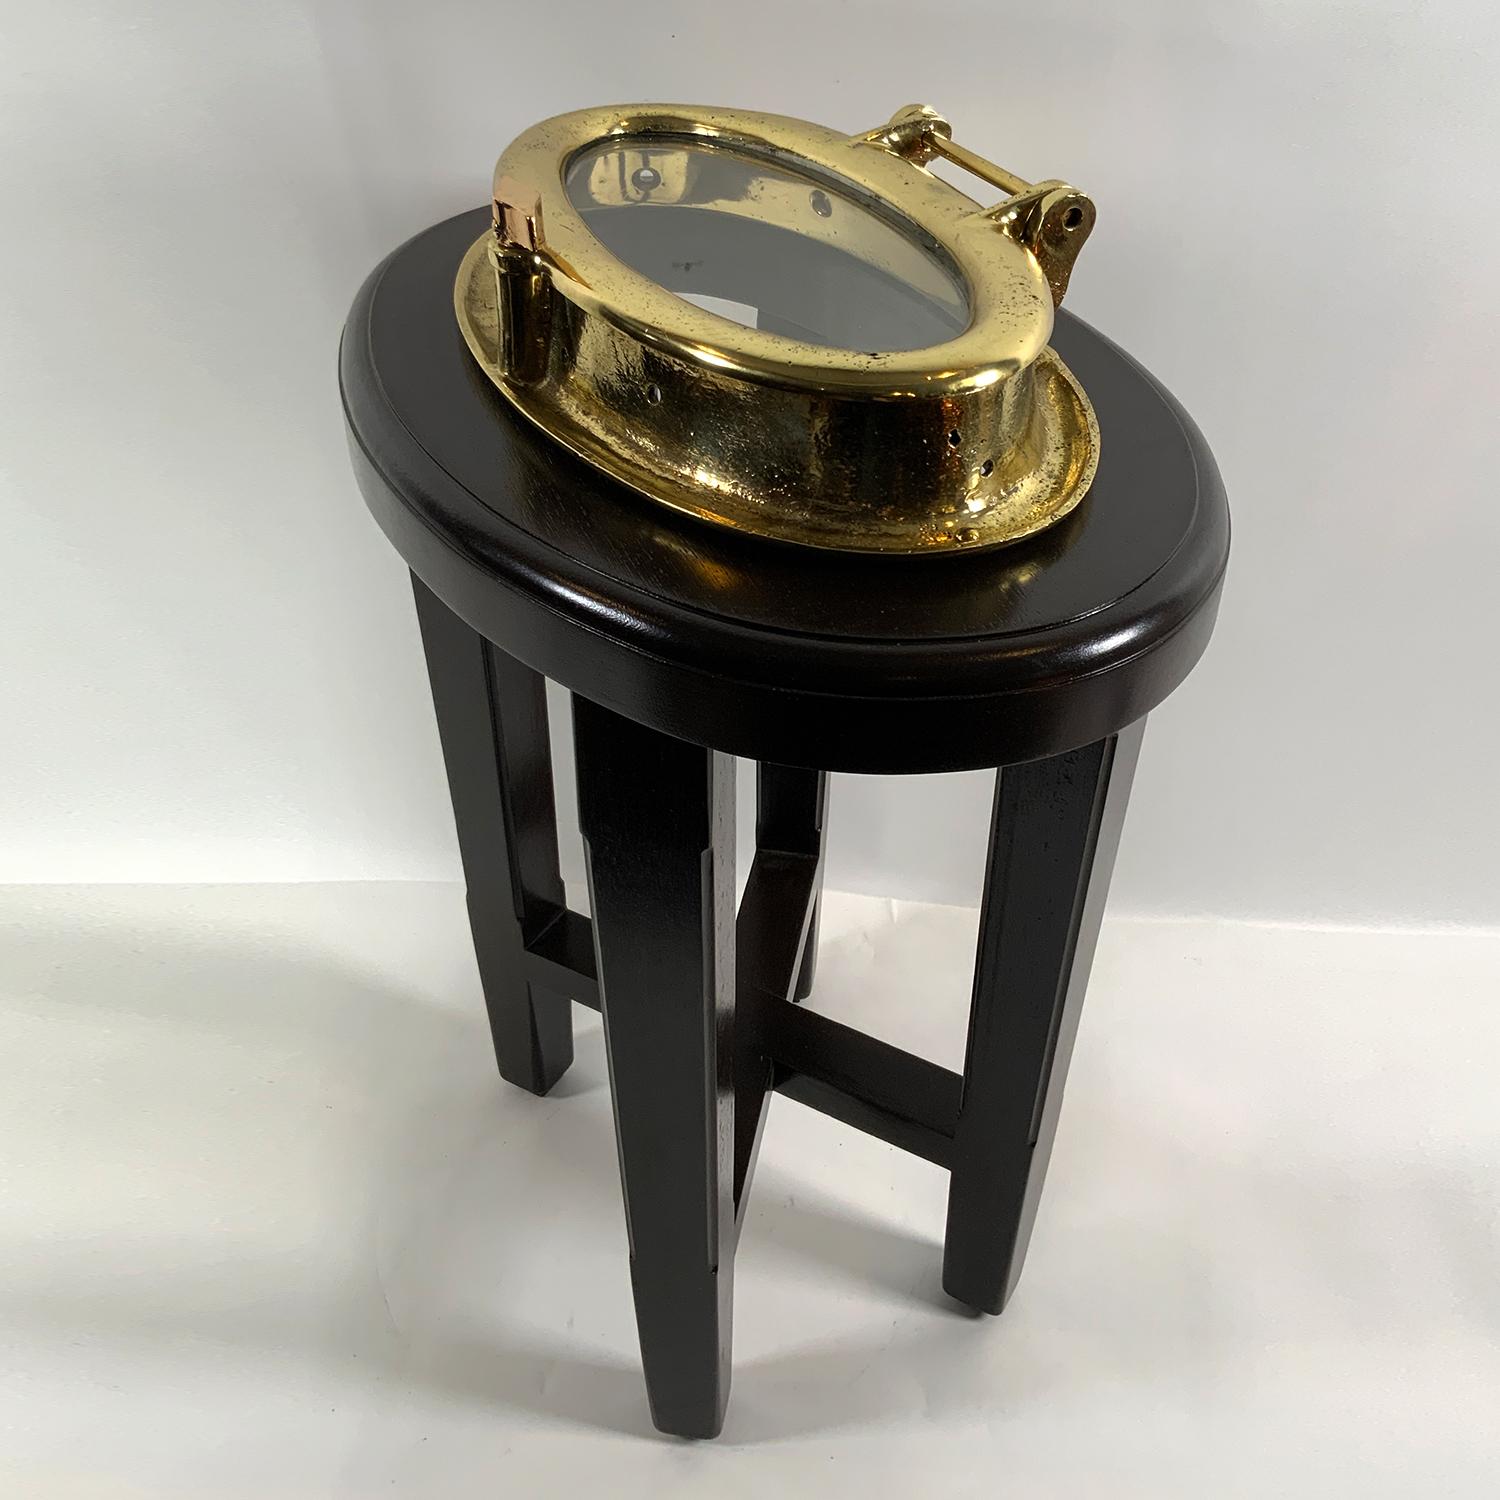 Lacquered Solid Brass Catboat Porthole Table For Sale